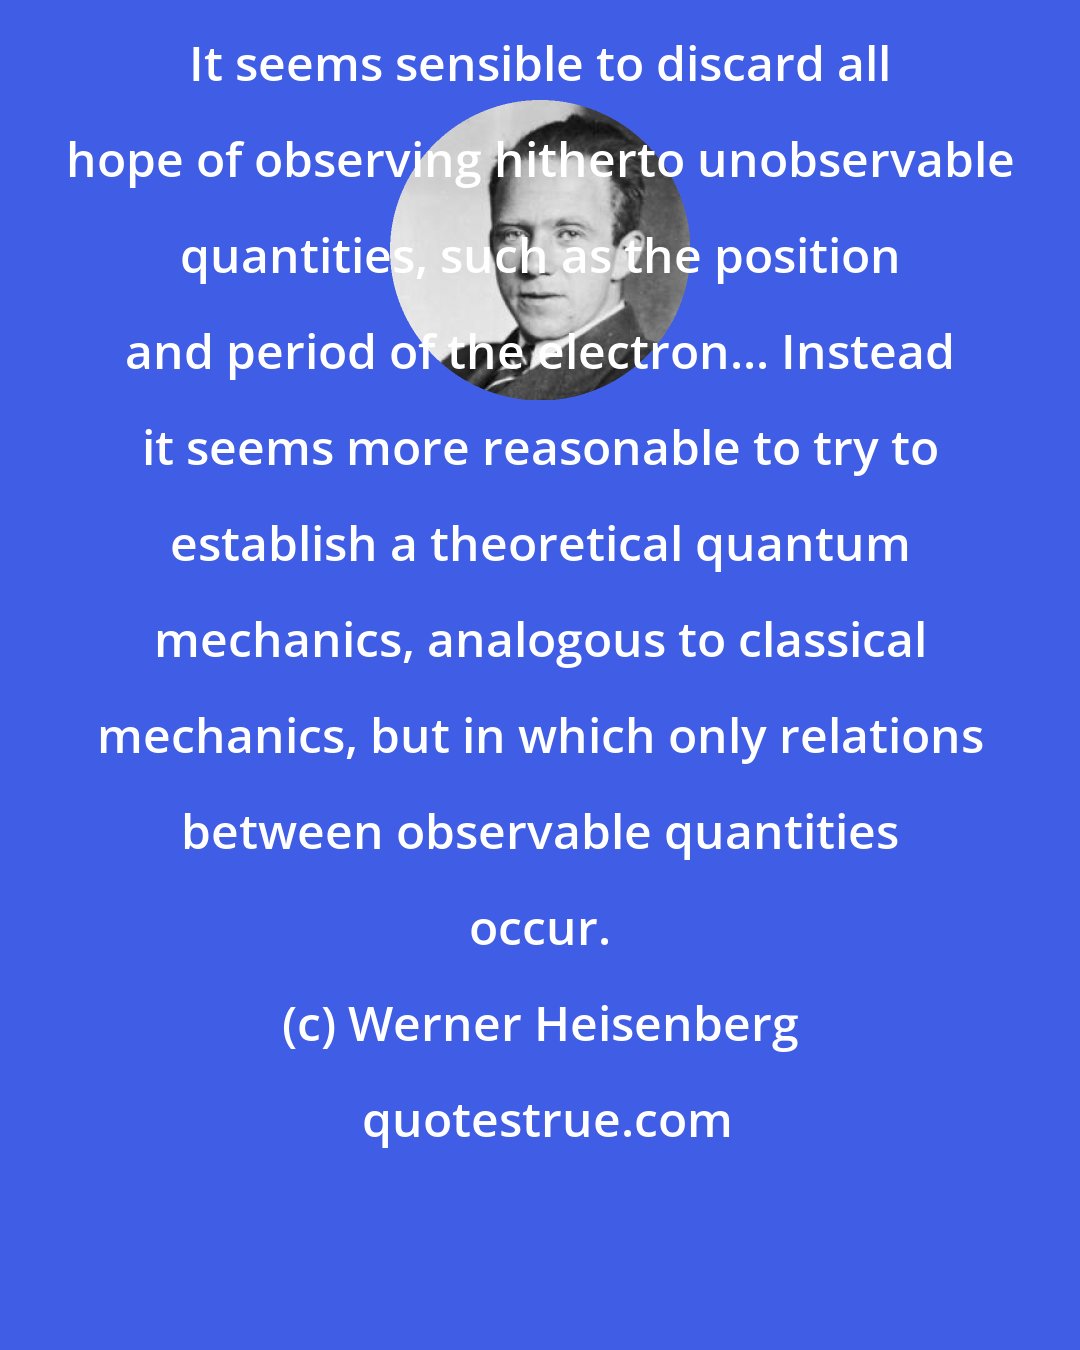 Werner Heisenberg: It seems sensible to discard all hope of observing hitherto unobservable quantities, such as the position and period of the electron... Instead it seems more reasonable to try to establish a theoretical quantum mechanics, analogous to classical mechanics, but in which only relations between observable quantities occur.